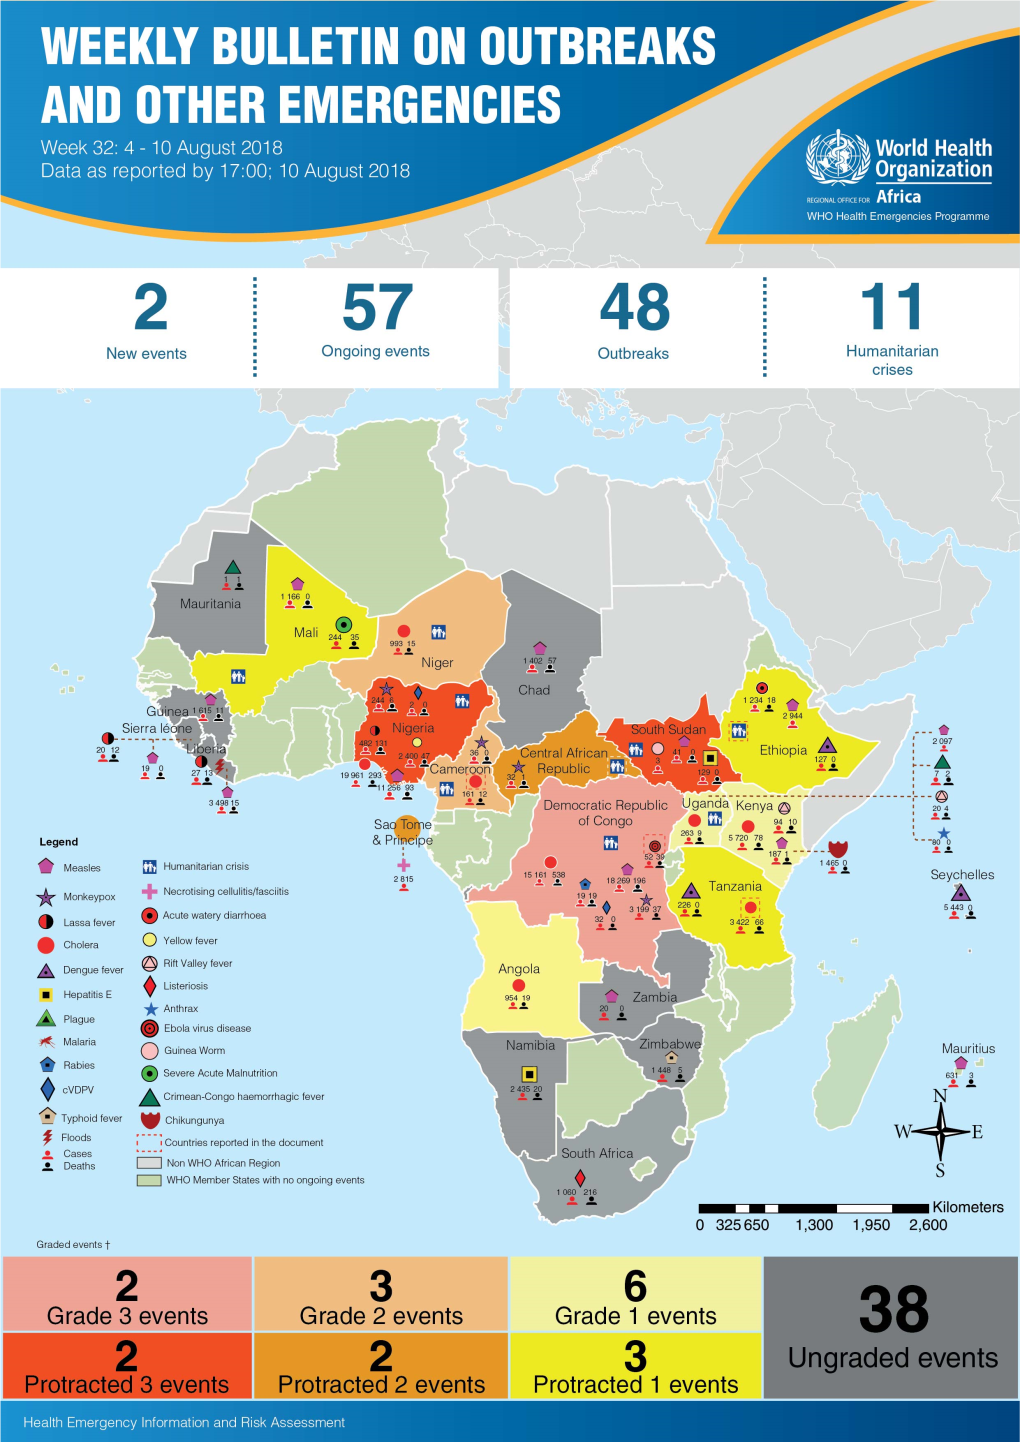 Tanzania 8 Summary of Major Humanitarian Crisis in Central African Republic Issues Challenges and Humanitarian Crisis in Ethiopia